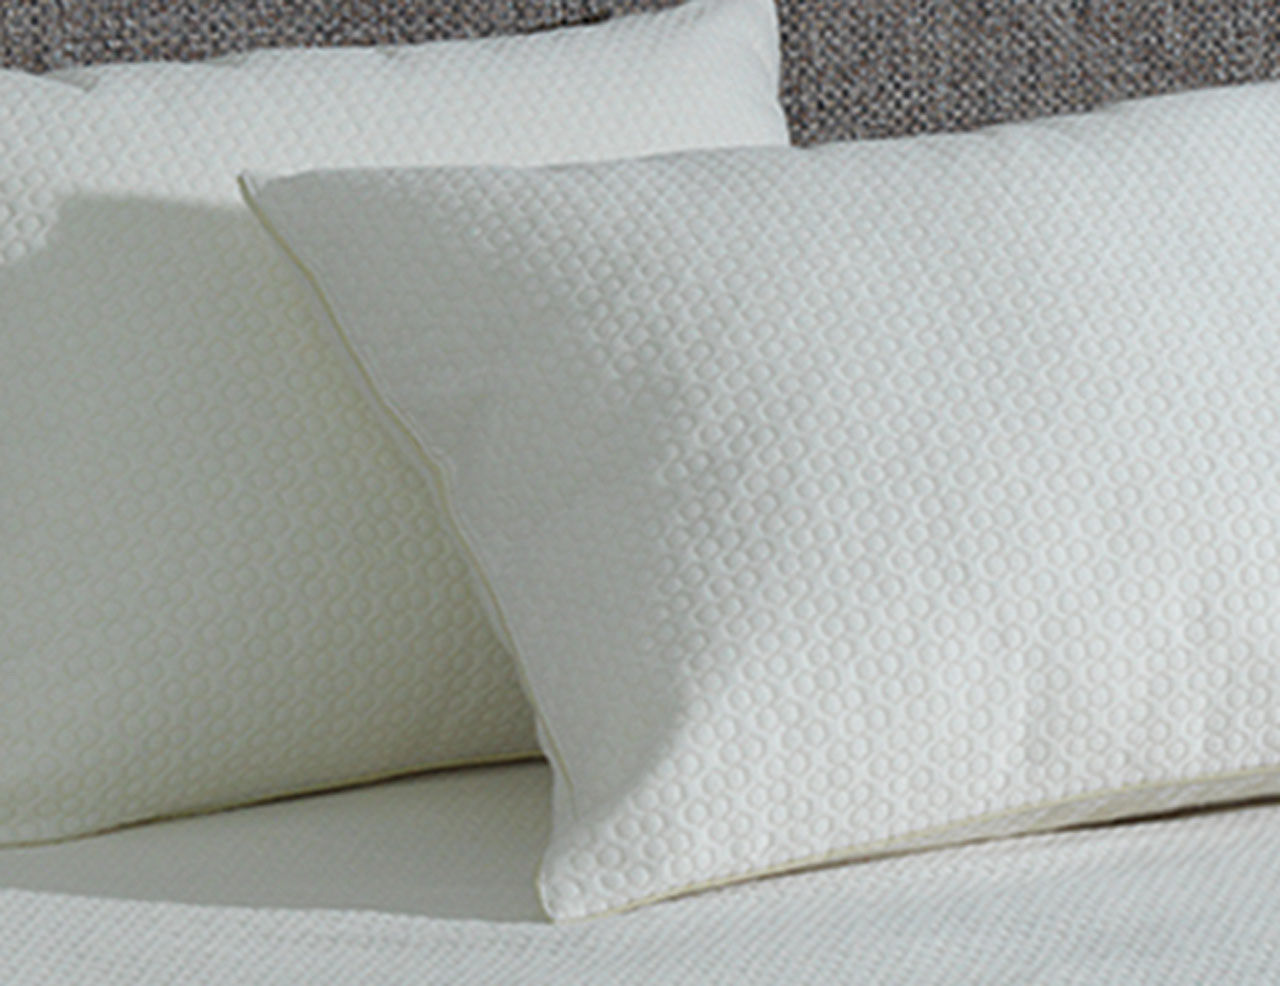 Are AllerEase Professional Pillows Platinum Style hypoallergenic?